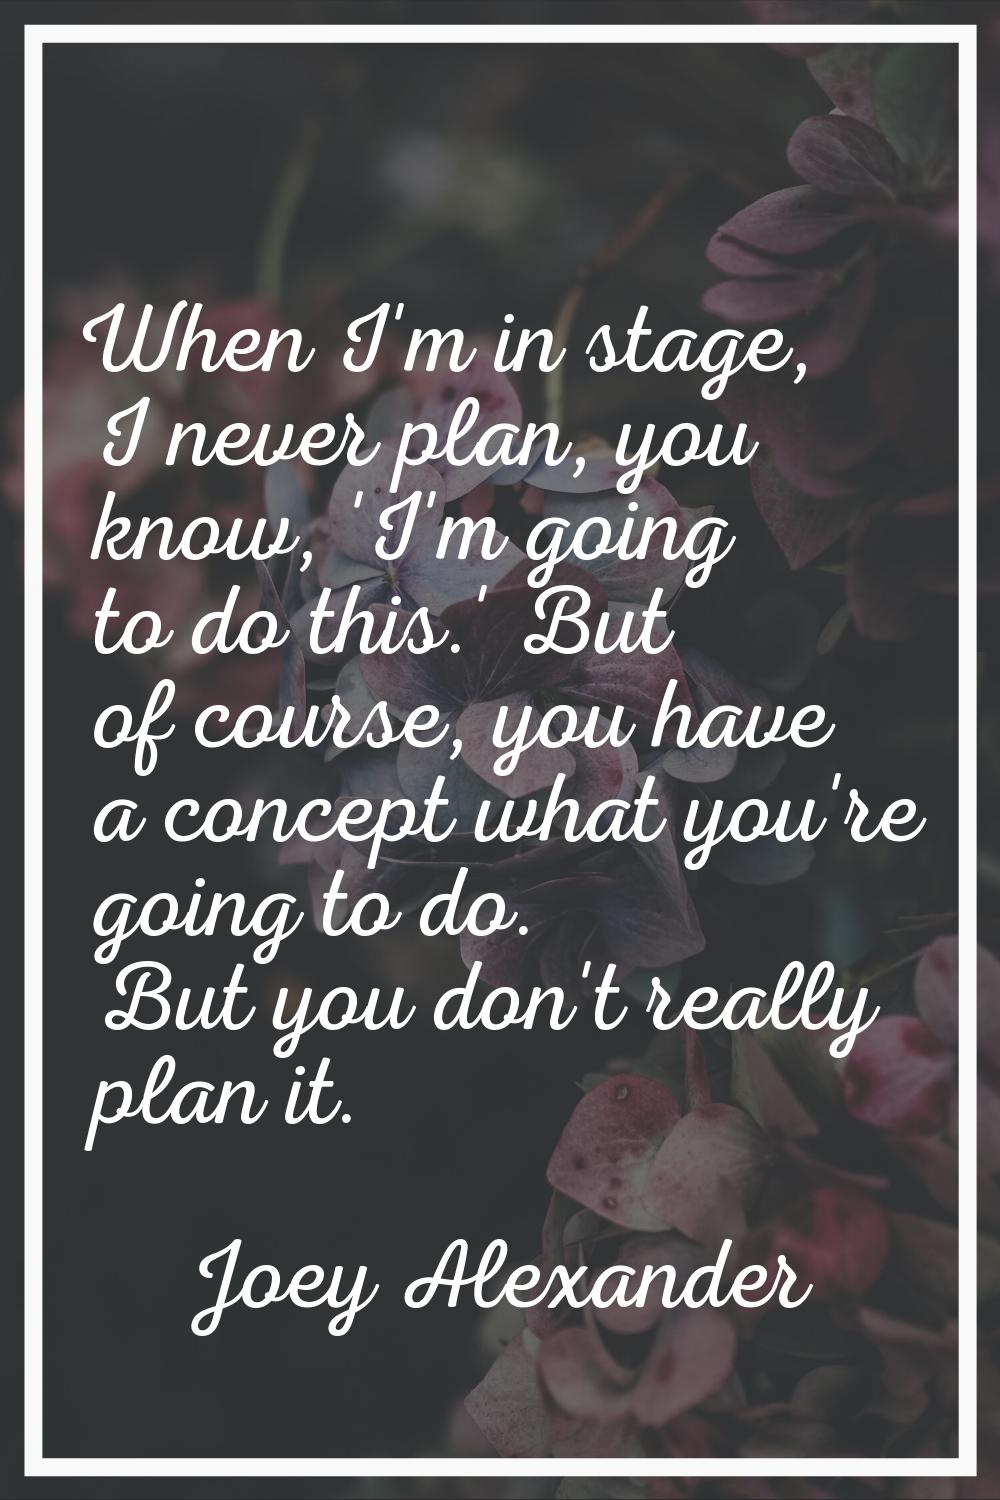 When I'm in stage, I never plan, you know, 'I'm going to do this.' But of course, you have a concep